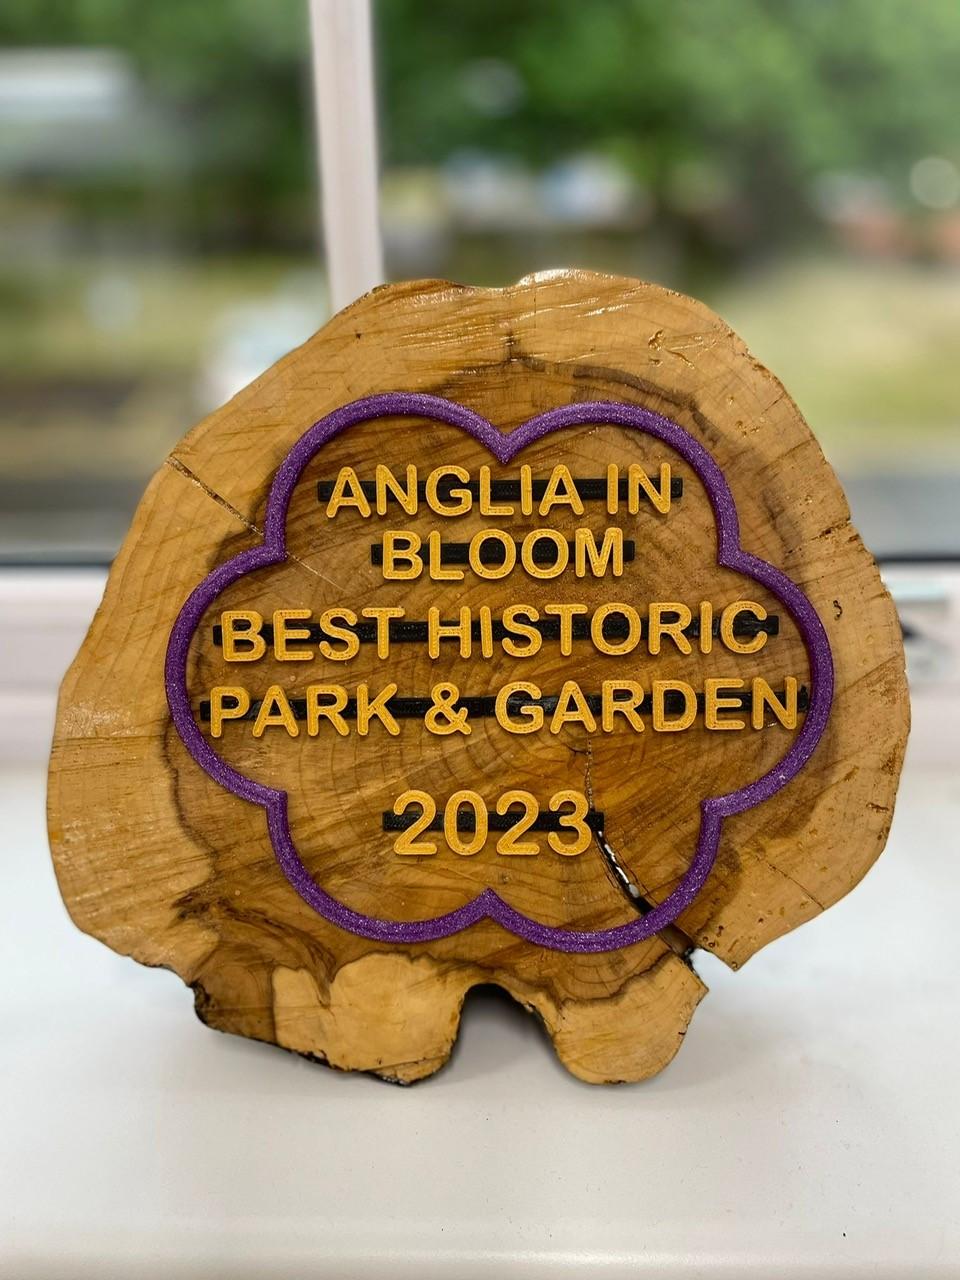 Anglia in Bloom best historic park